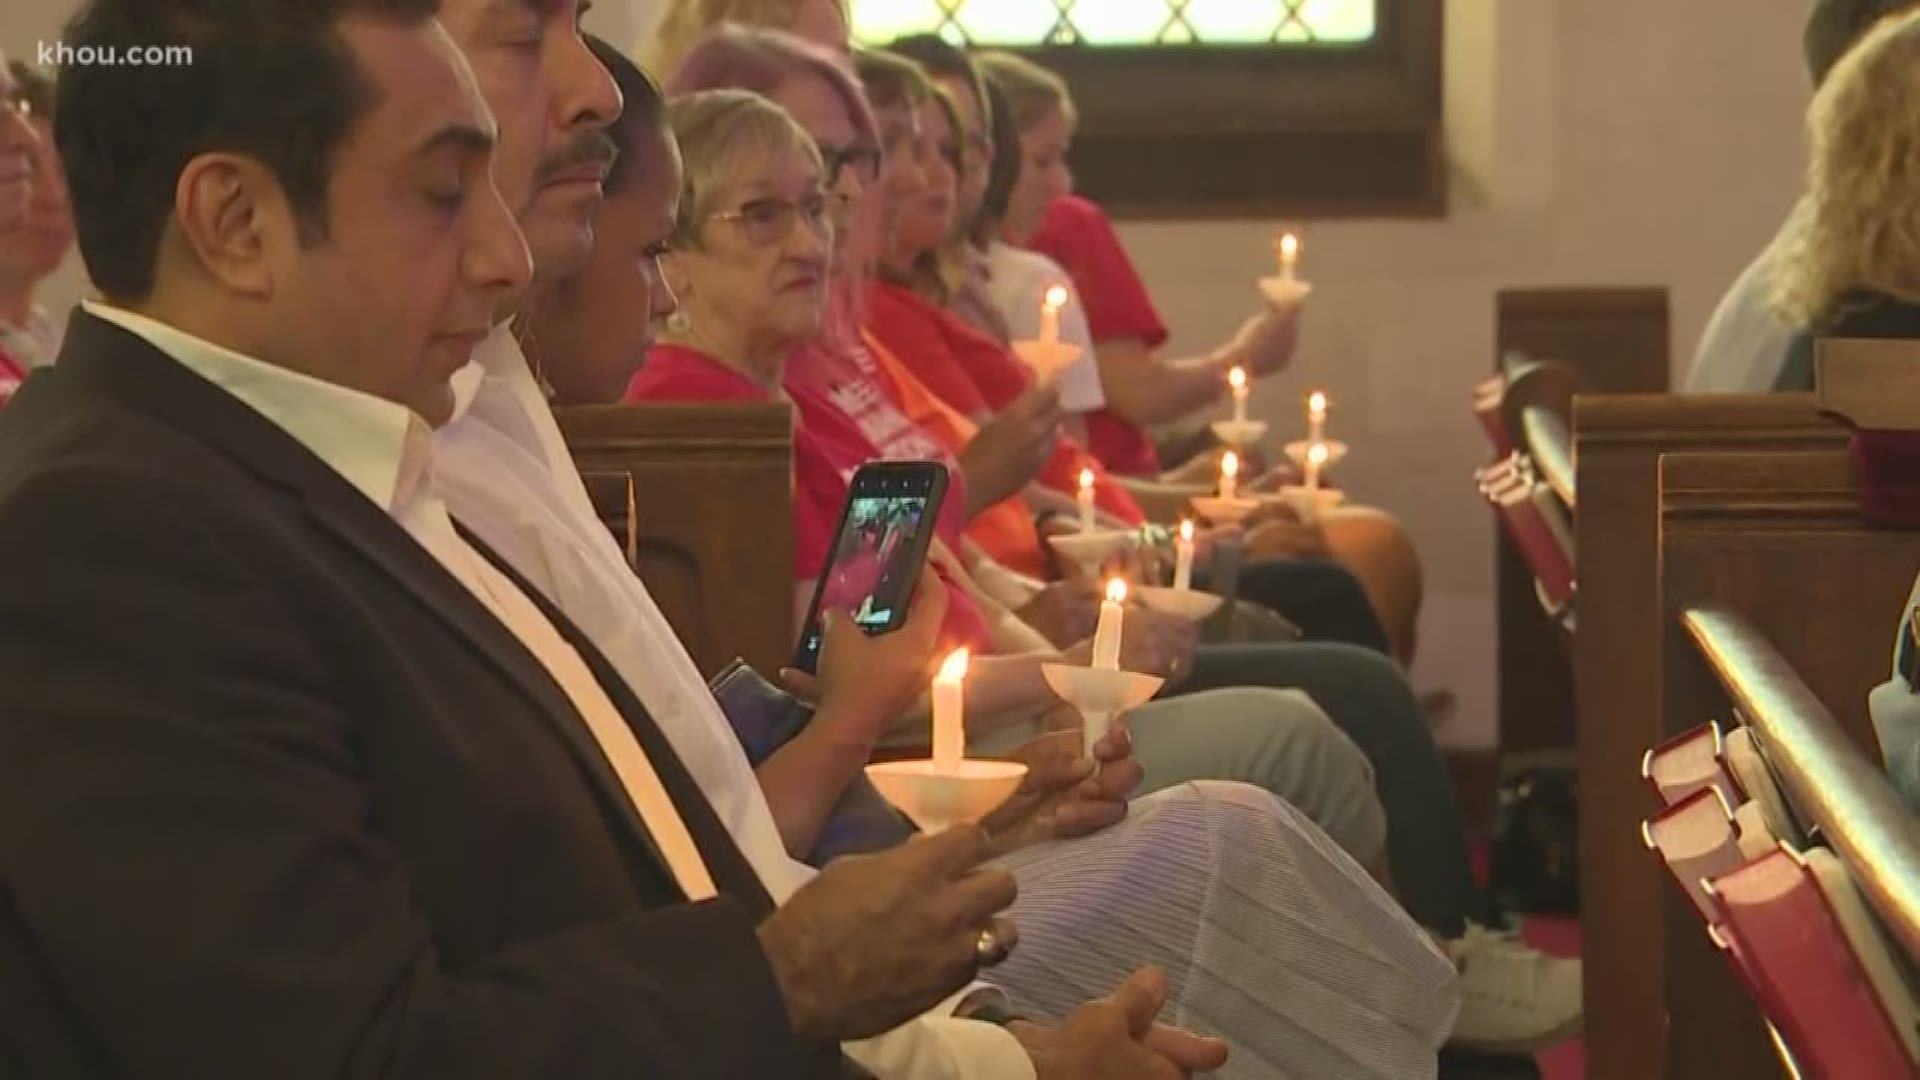 Two vigils were held in Houston with a dual purpose: to honor the mass shooting victims and call for more gun regulations.